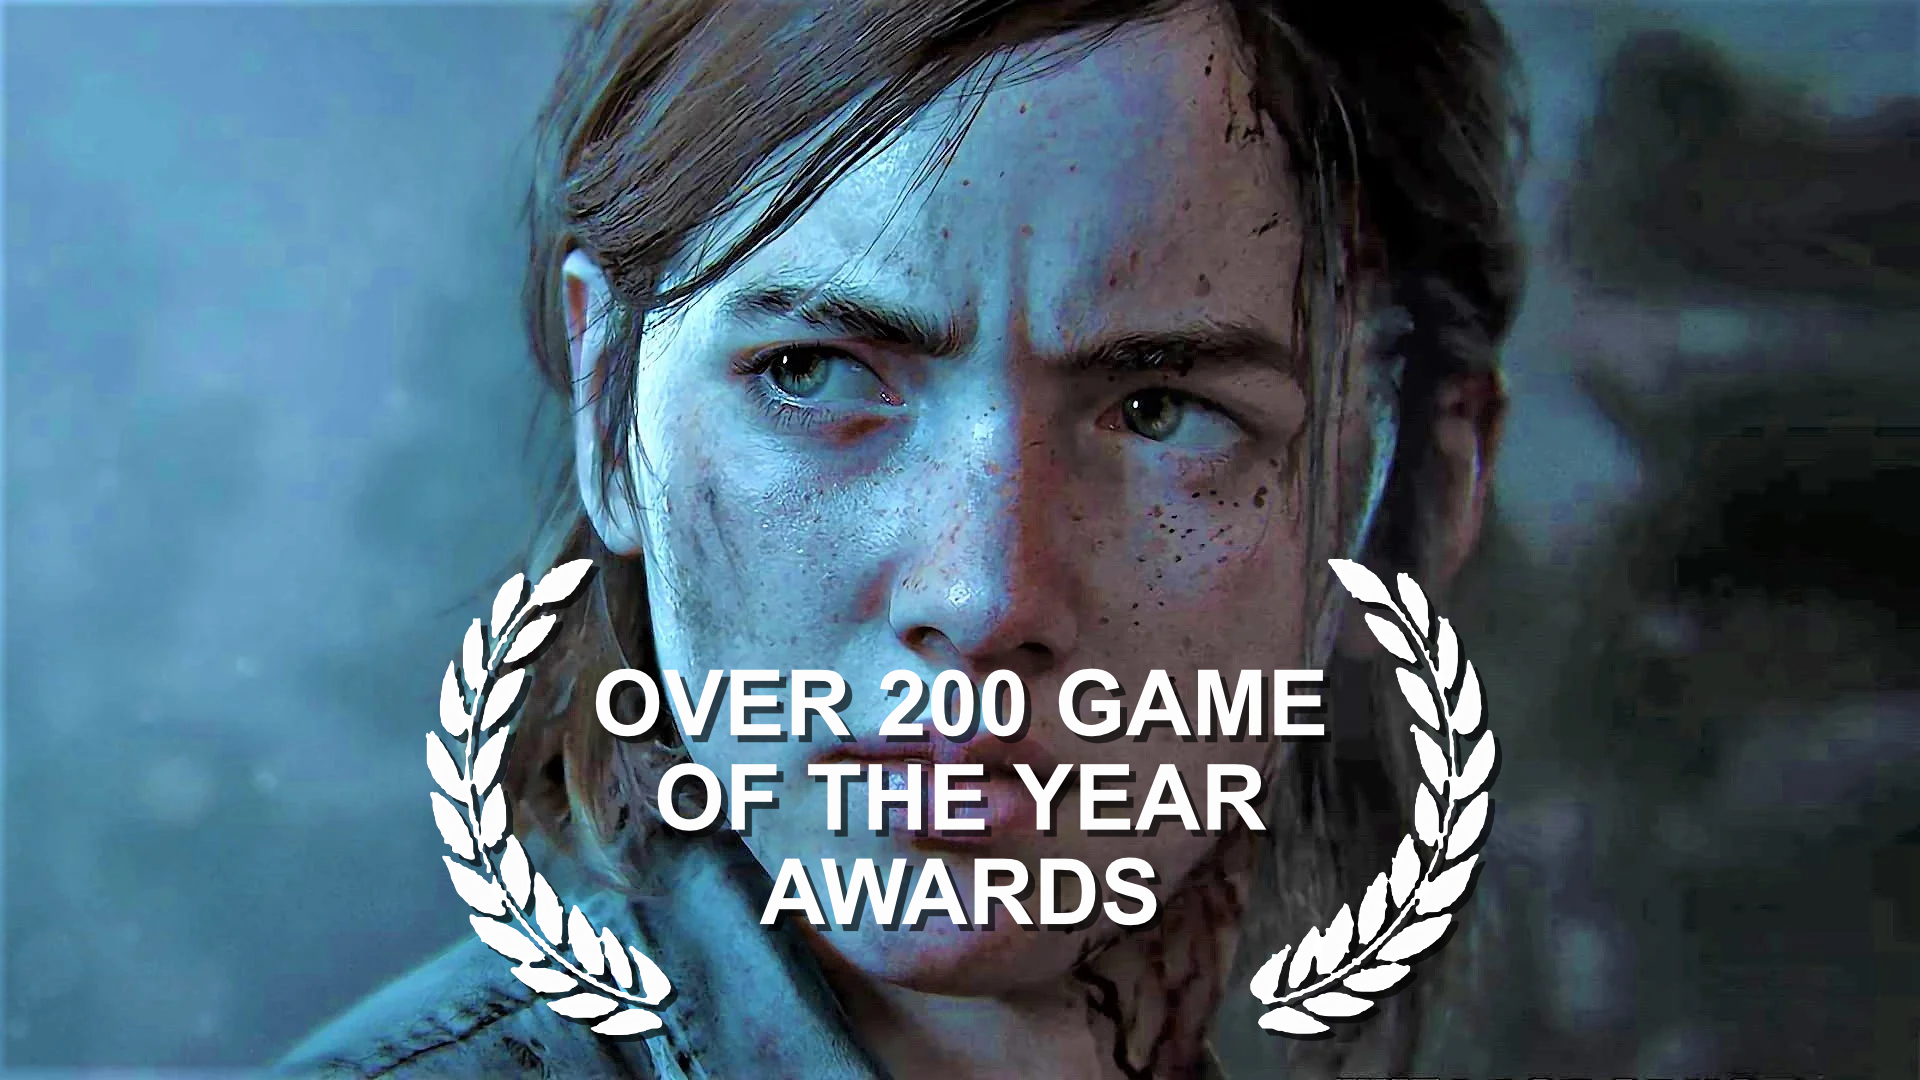 The Last Of Us Part II Wins Game Of The Year At The 2020 Game Awards